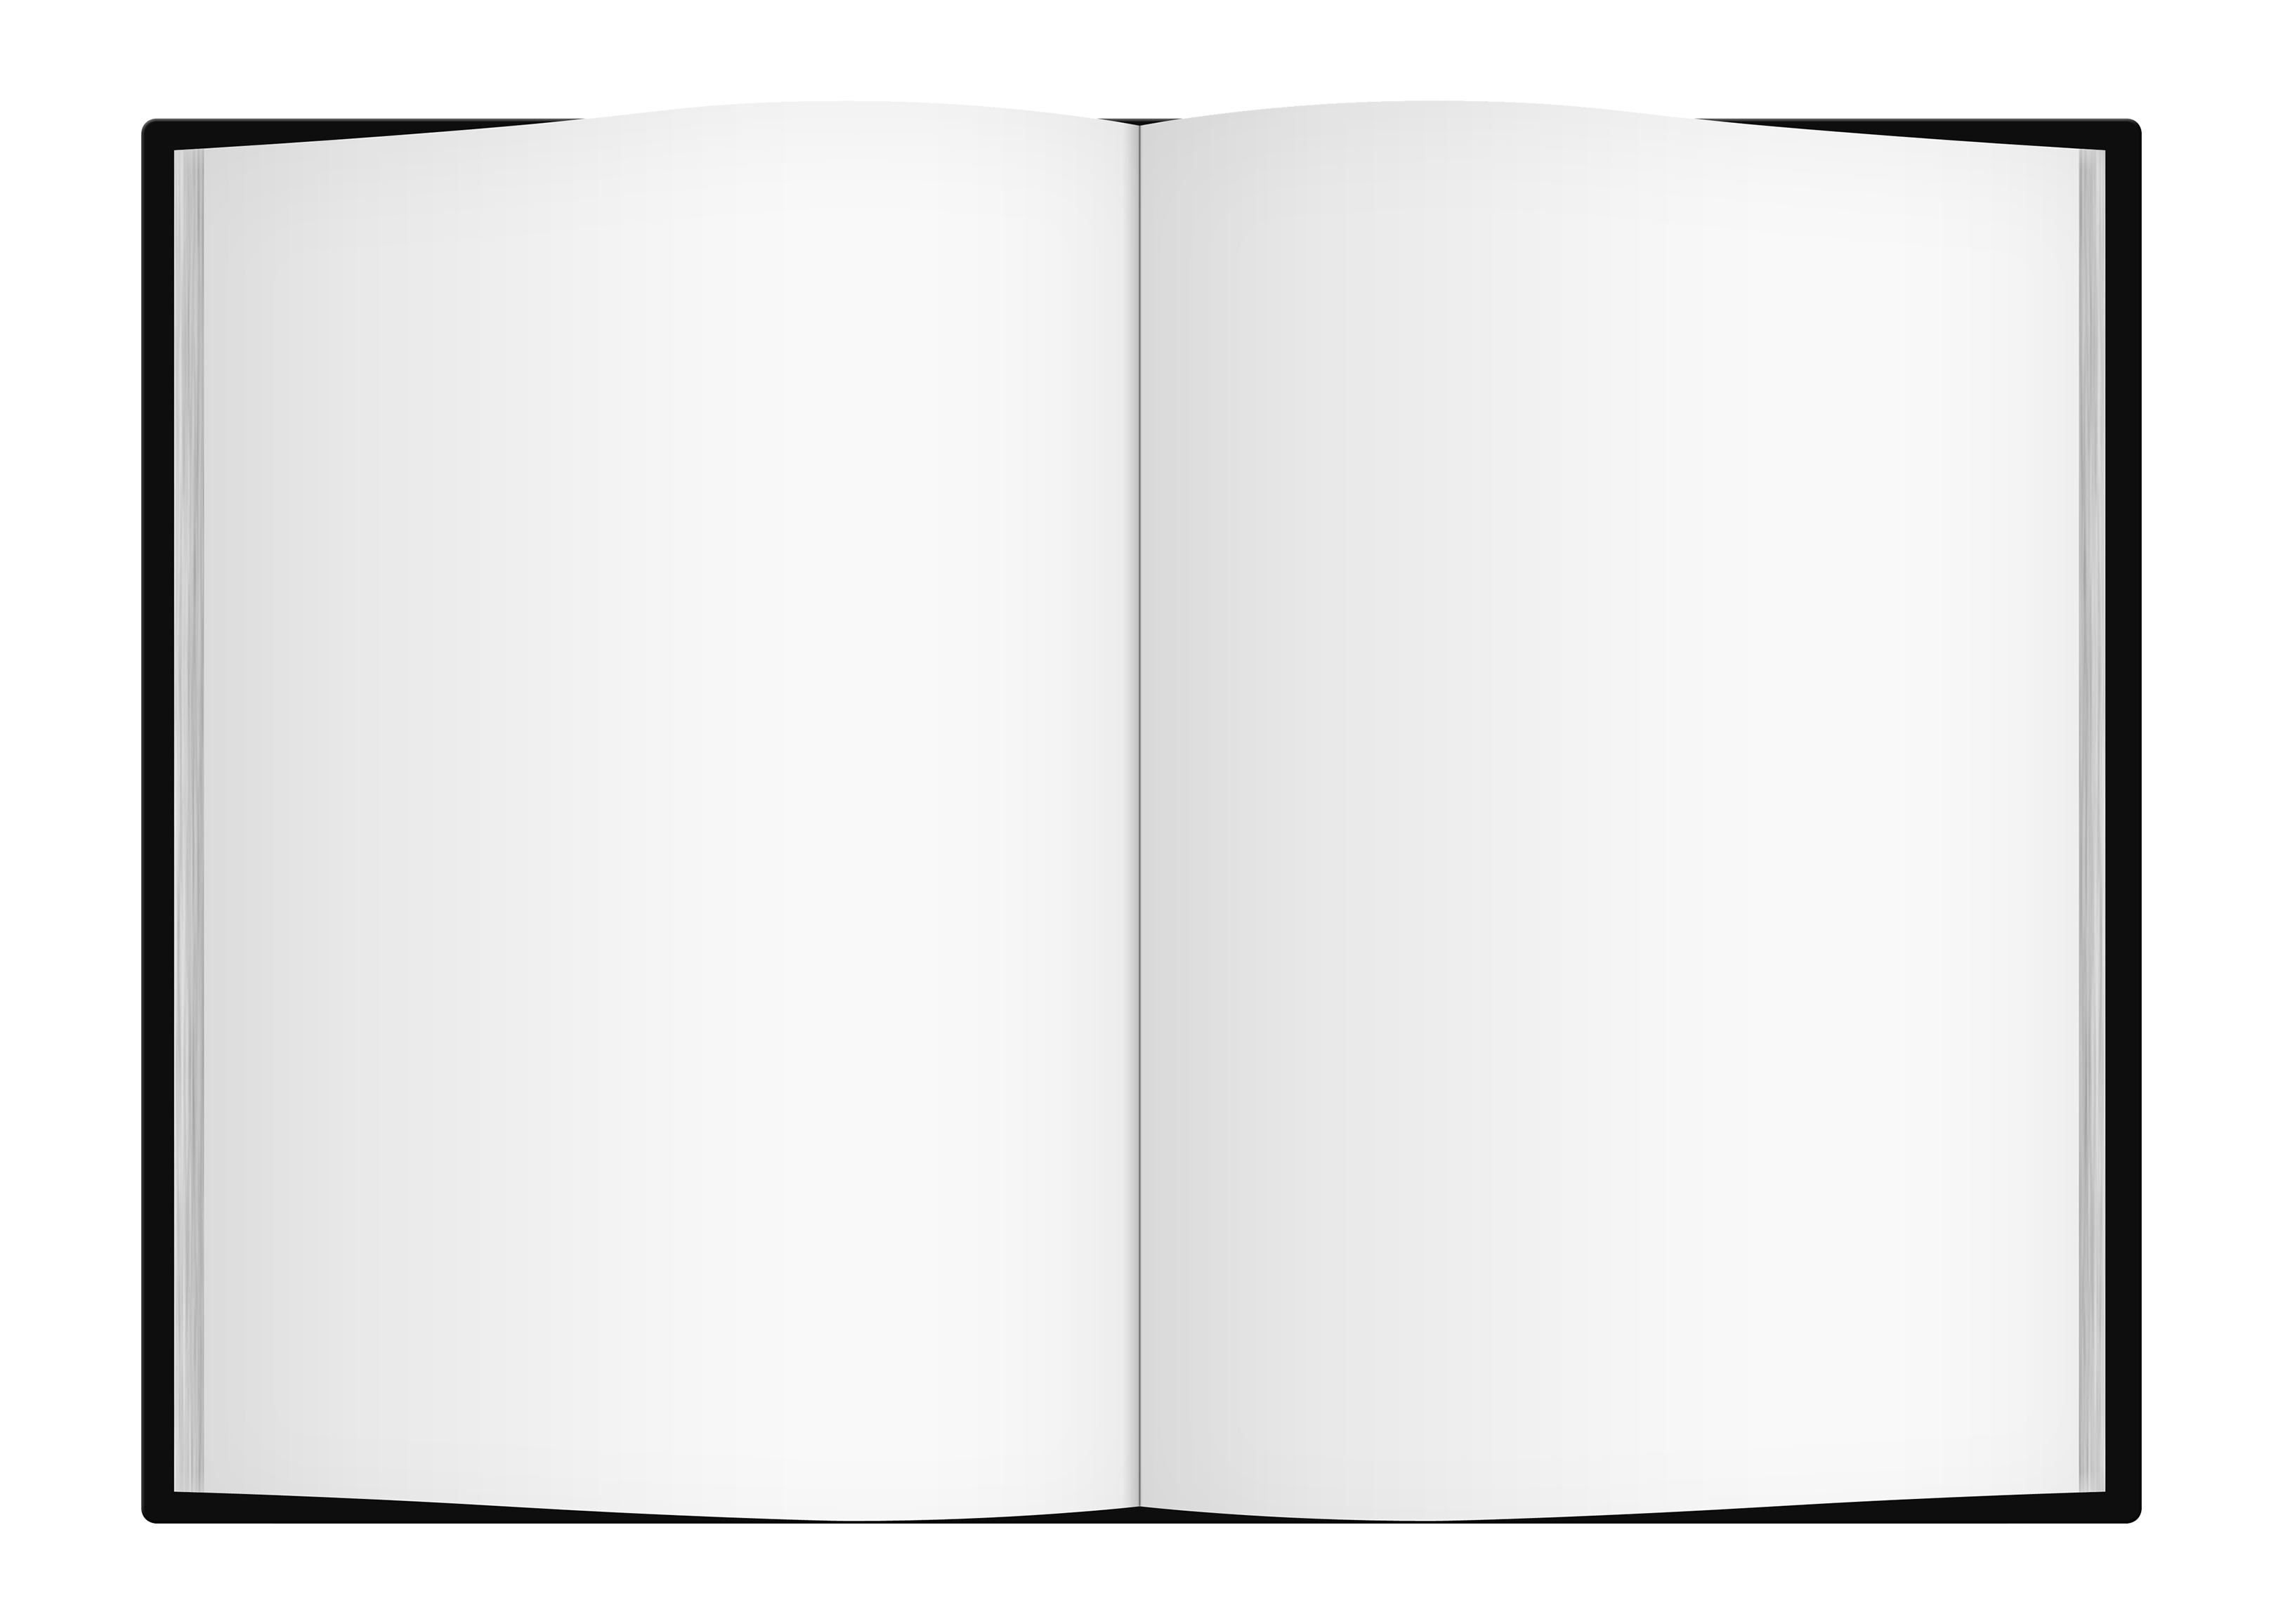 Book PNG images download, open book PNG